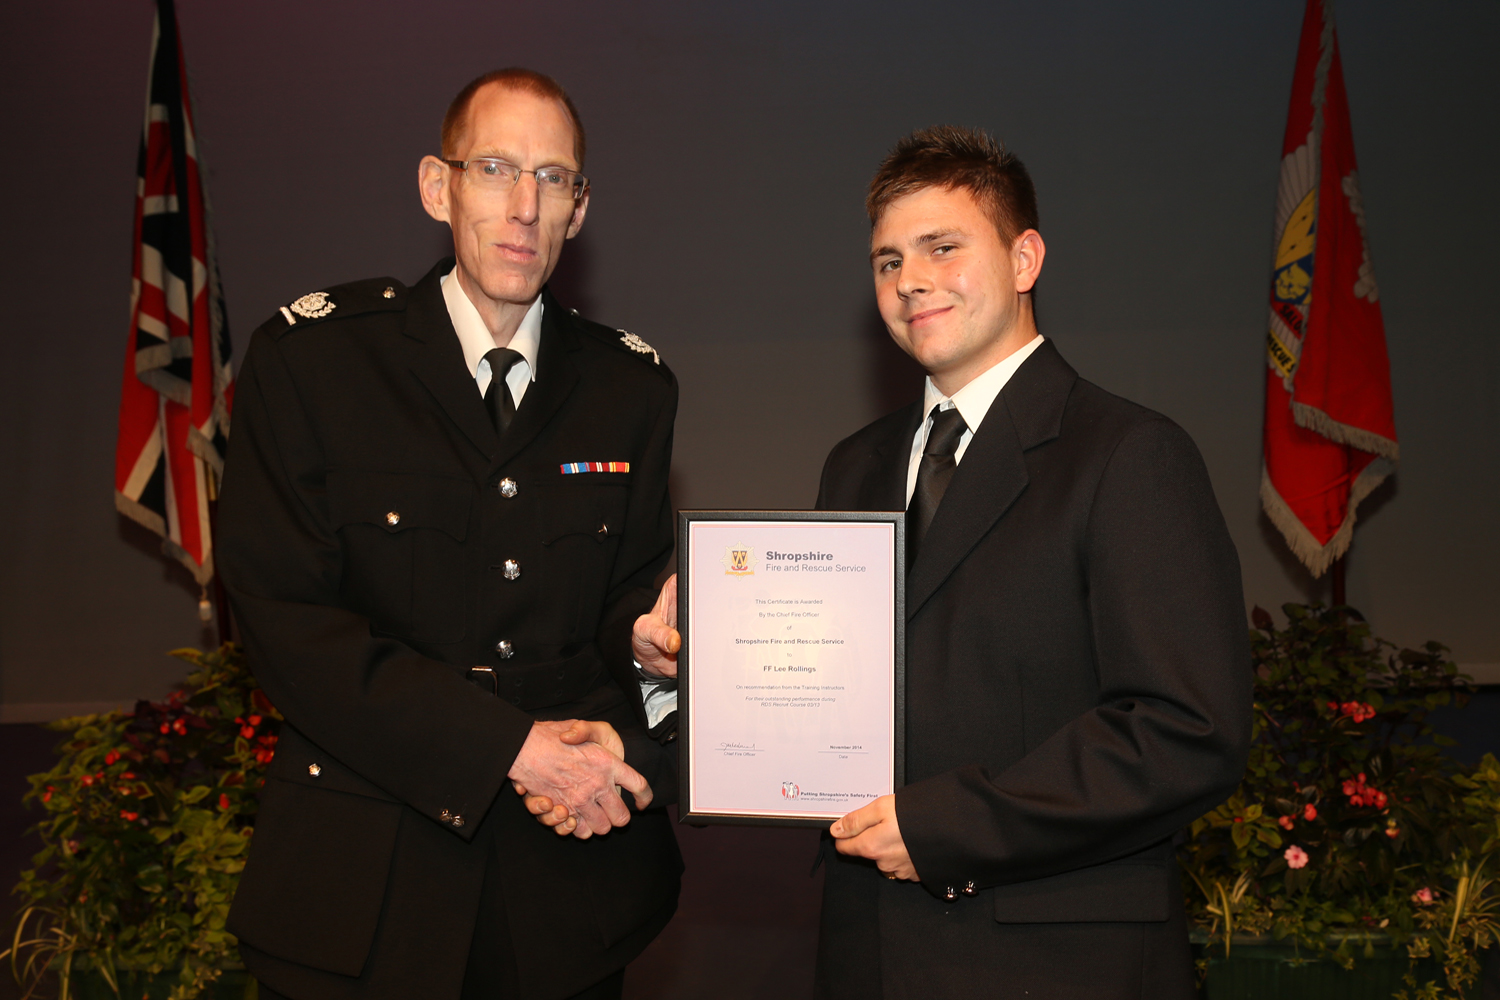 Lee Rollings, of Cleobury Mortimer, with the Instructors' Award